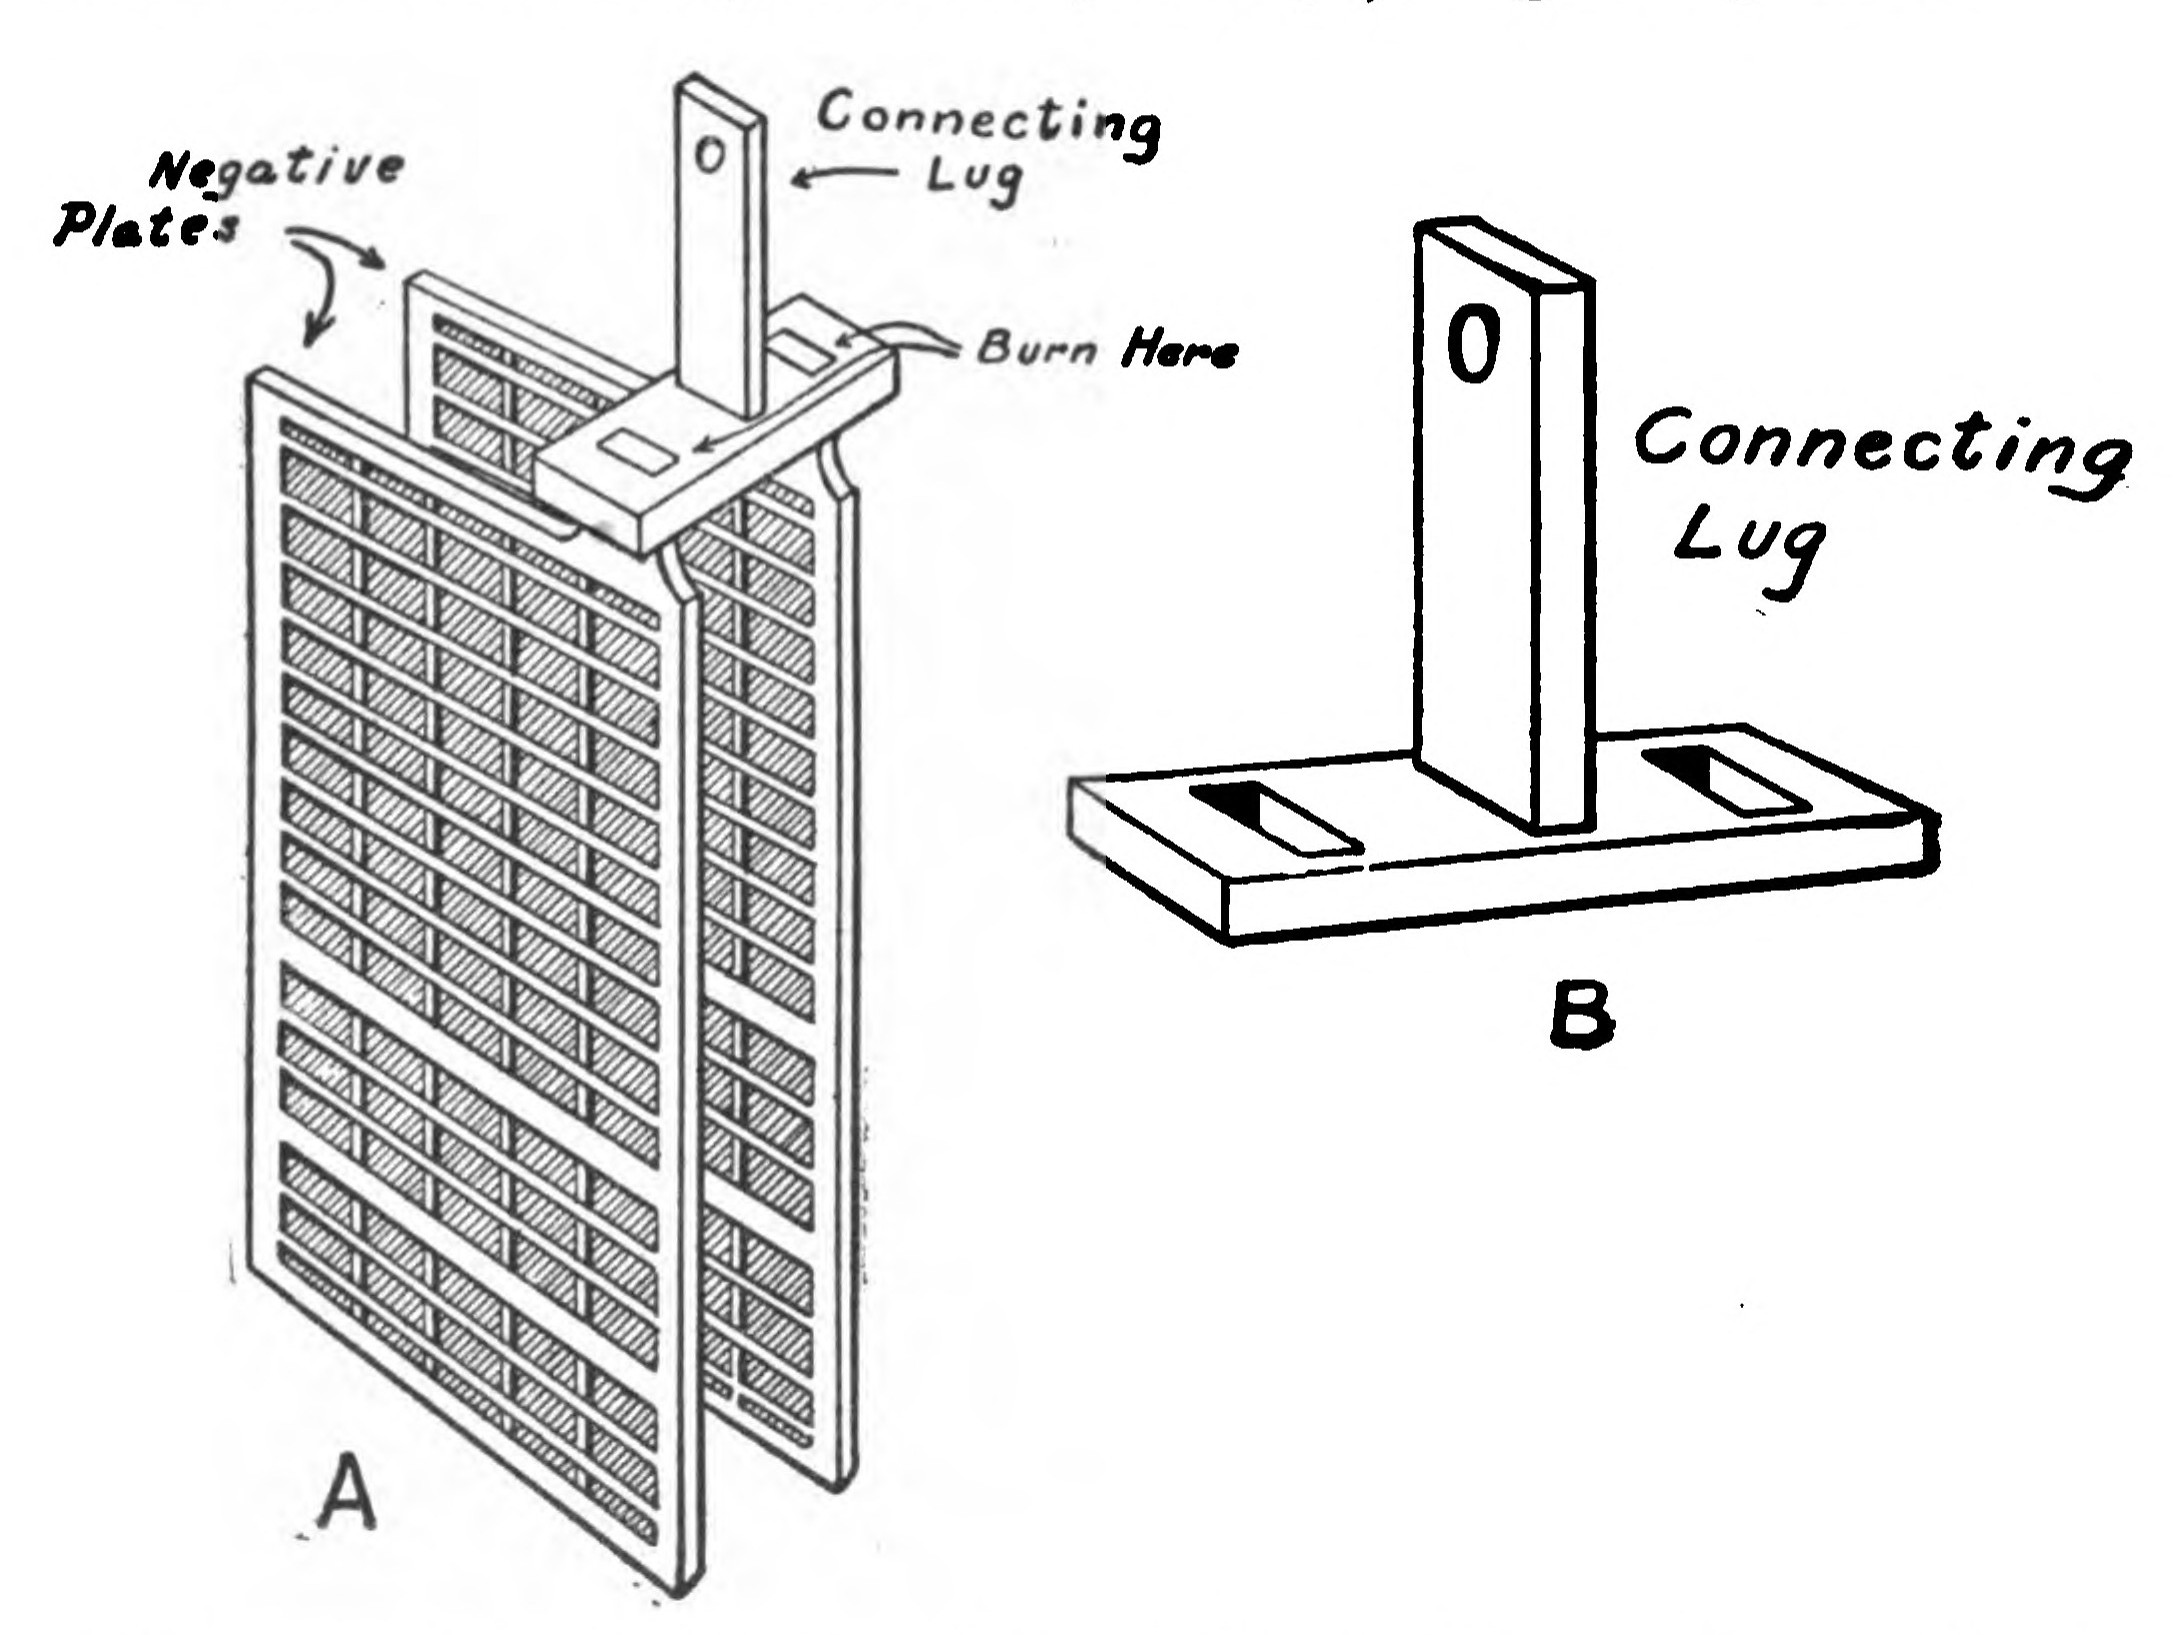 FIG. 43.—Two Negative Plates "burned" together and the Connecting Lug used.